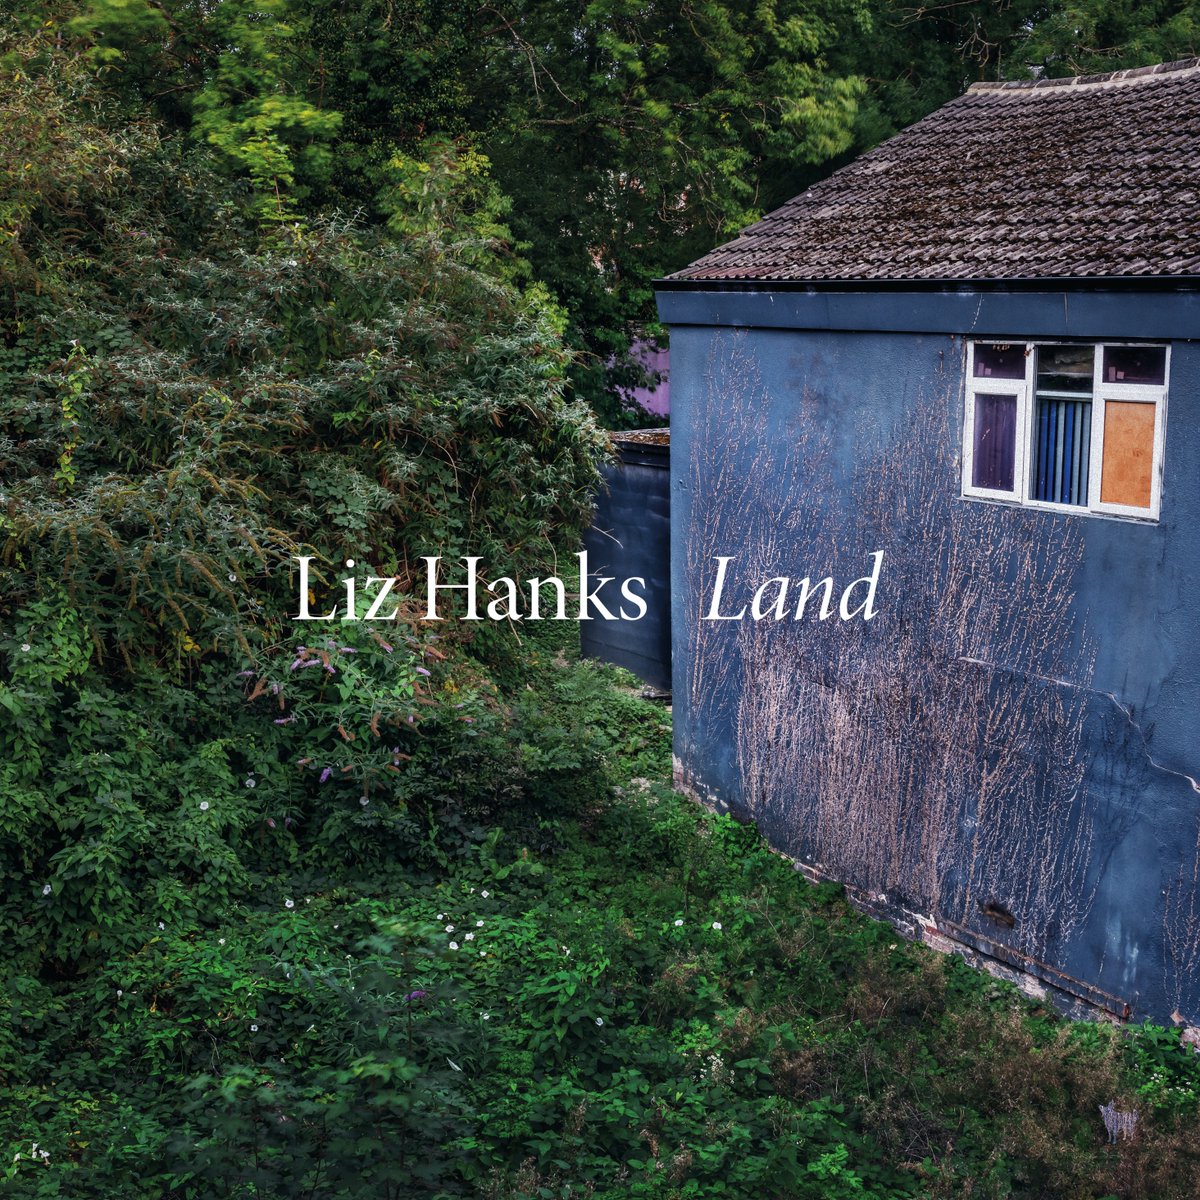 ⭐️⭐️⭐️ANNOUNCING NEW MUSIC ⭐️⭐️⭐️
We are excited to announce the new album ‘Land’ from Sheffield based Cellist @lizhankscello 

Pre-order Liz Hanks - Land NOW! Out 02.06.23
Available on CD/DL/LP & Limited Edition Green LP
hudsonrecords.ffm.to/land